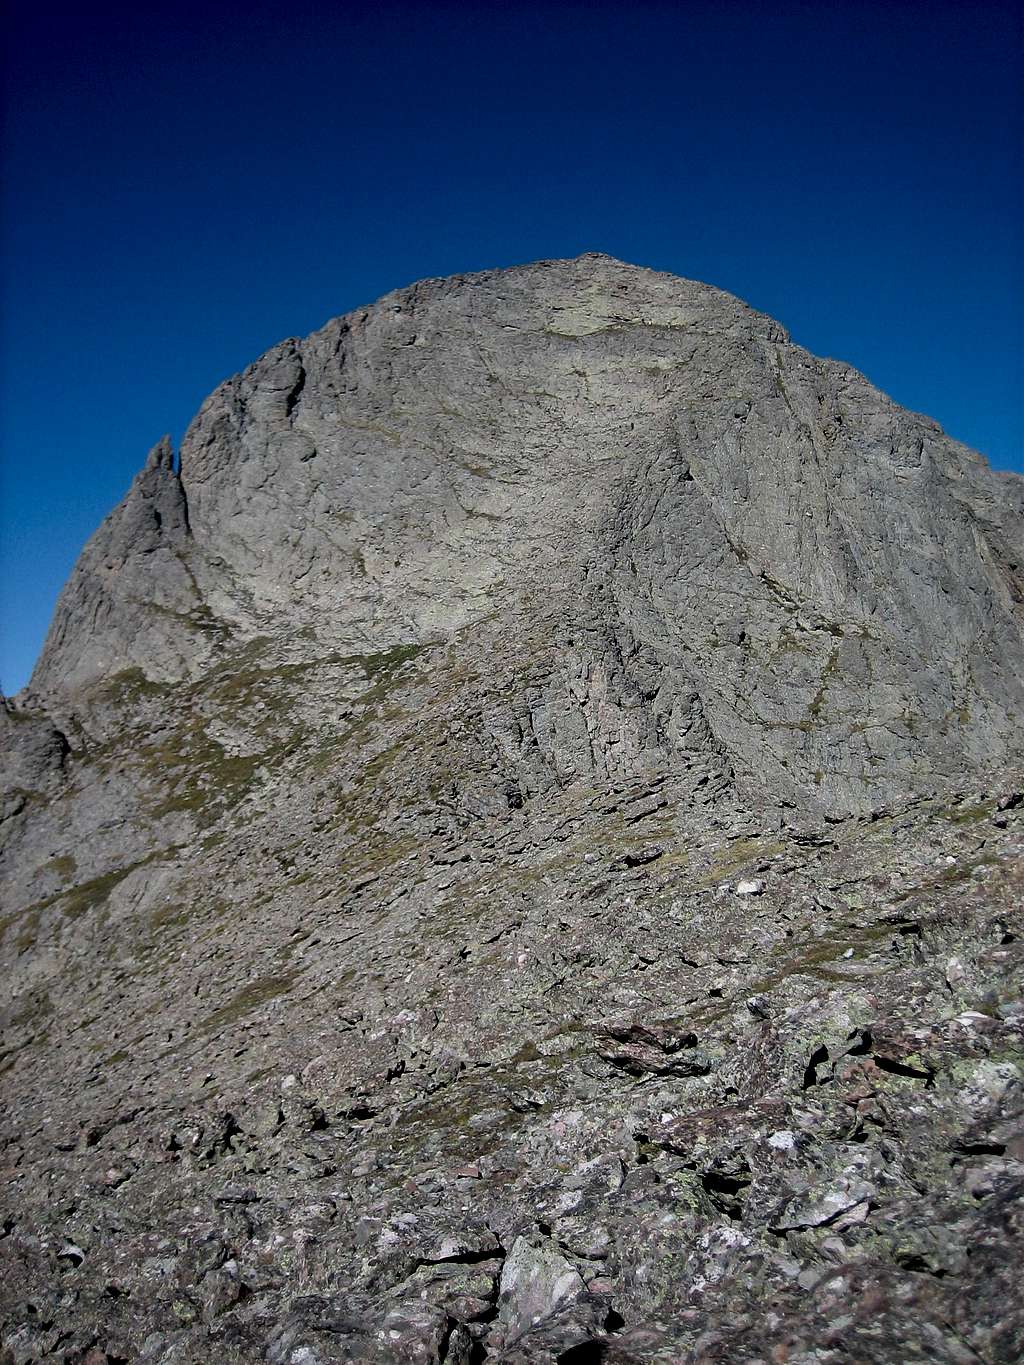 East Face